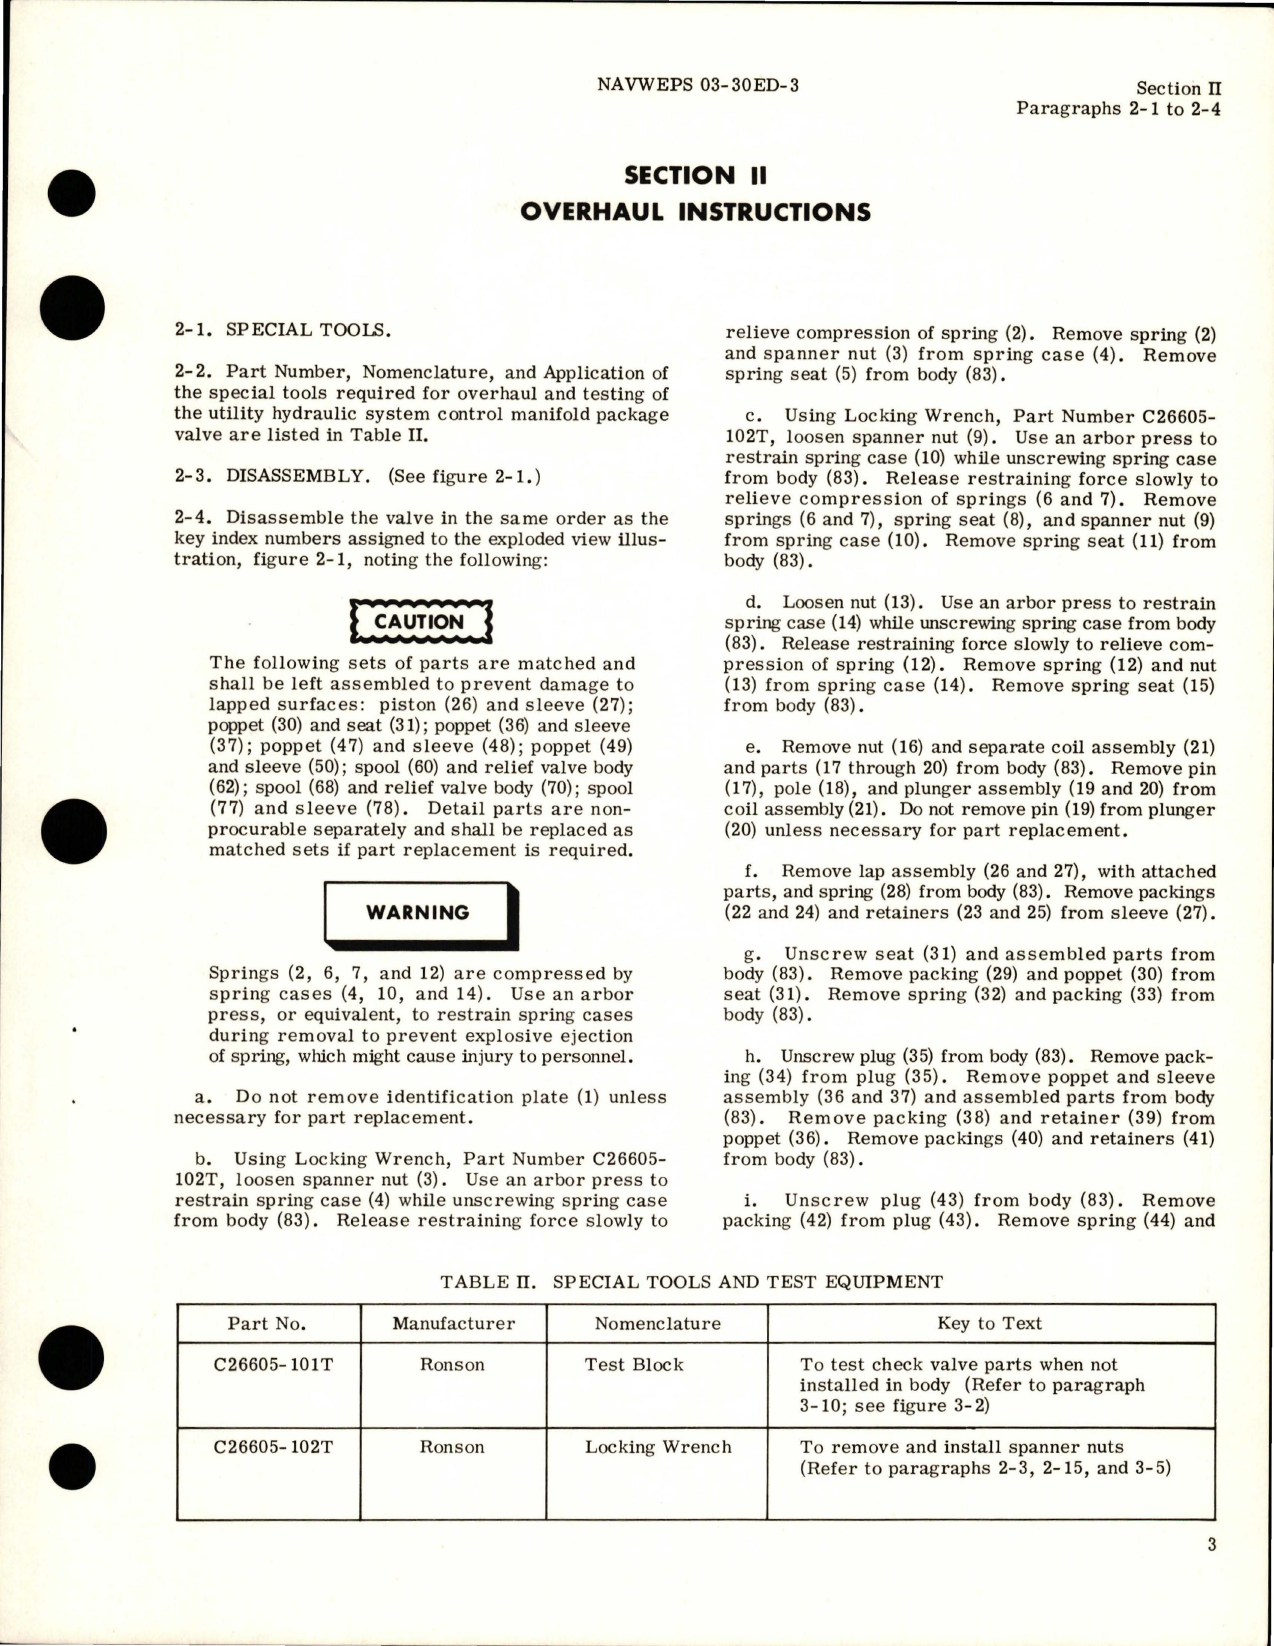 Sample page 7 from AirCorps Library document: Overhaul Instructions for Utility Hydraulic System Control Manifold Package Valve - Part 26C26605